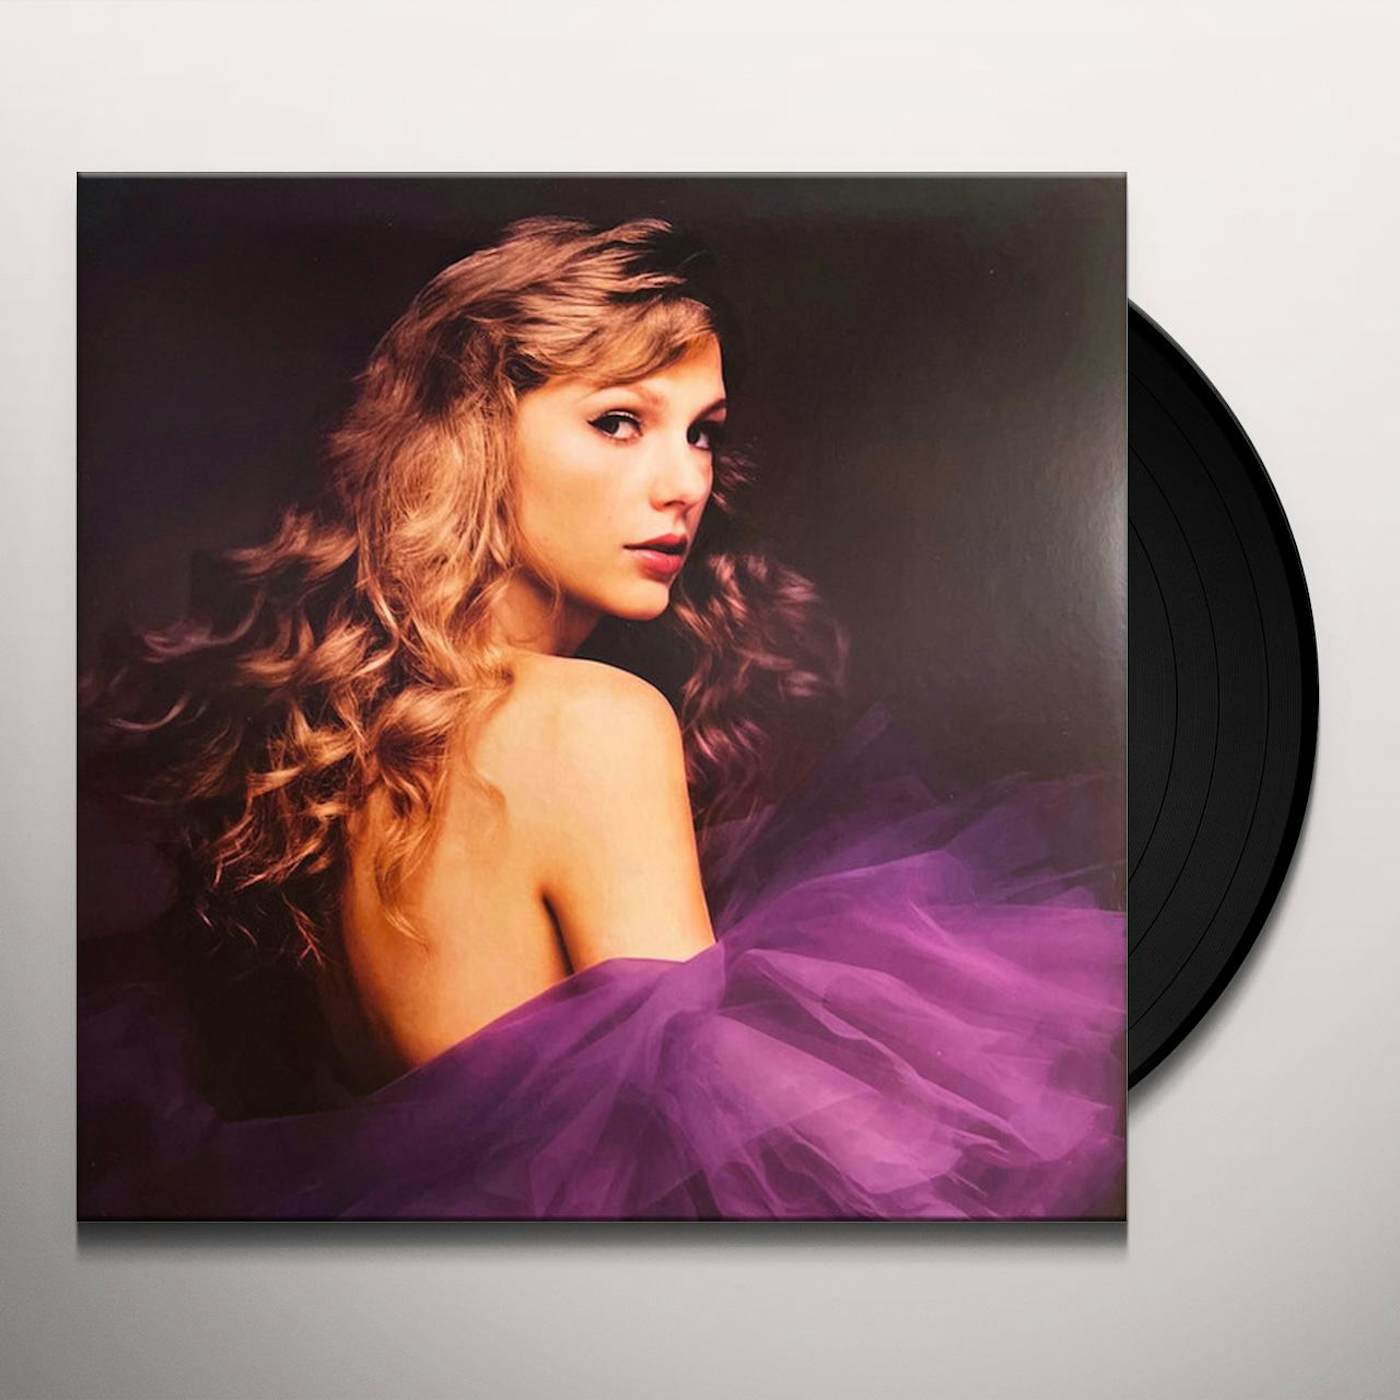 Taylor swift vinyl record collection  Taylor swift cd, Taylor swift album, Taylor  swift